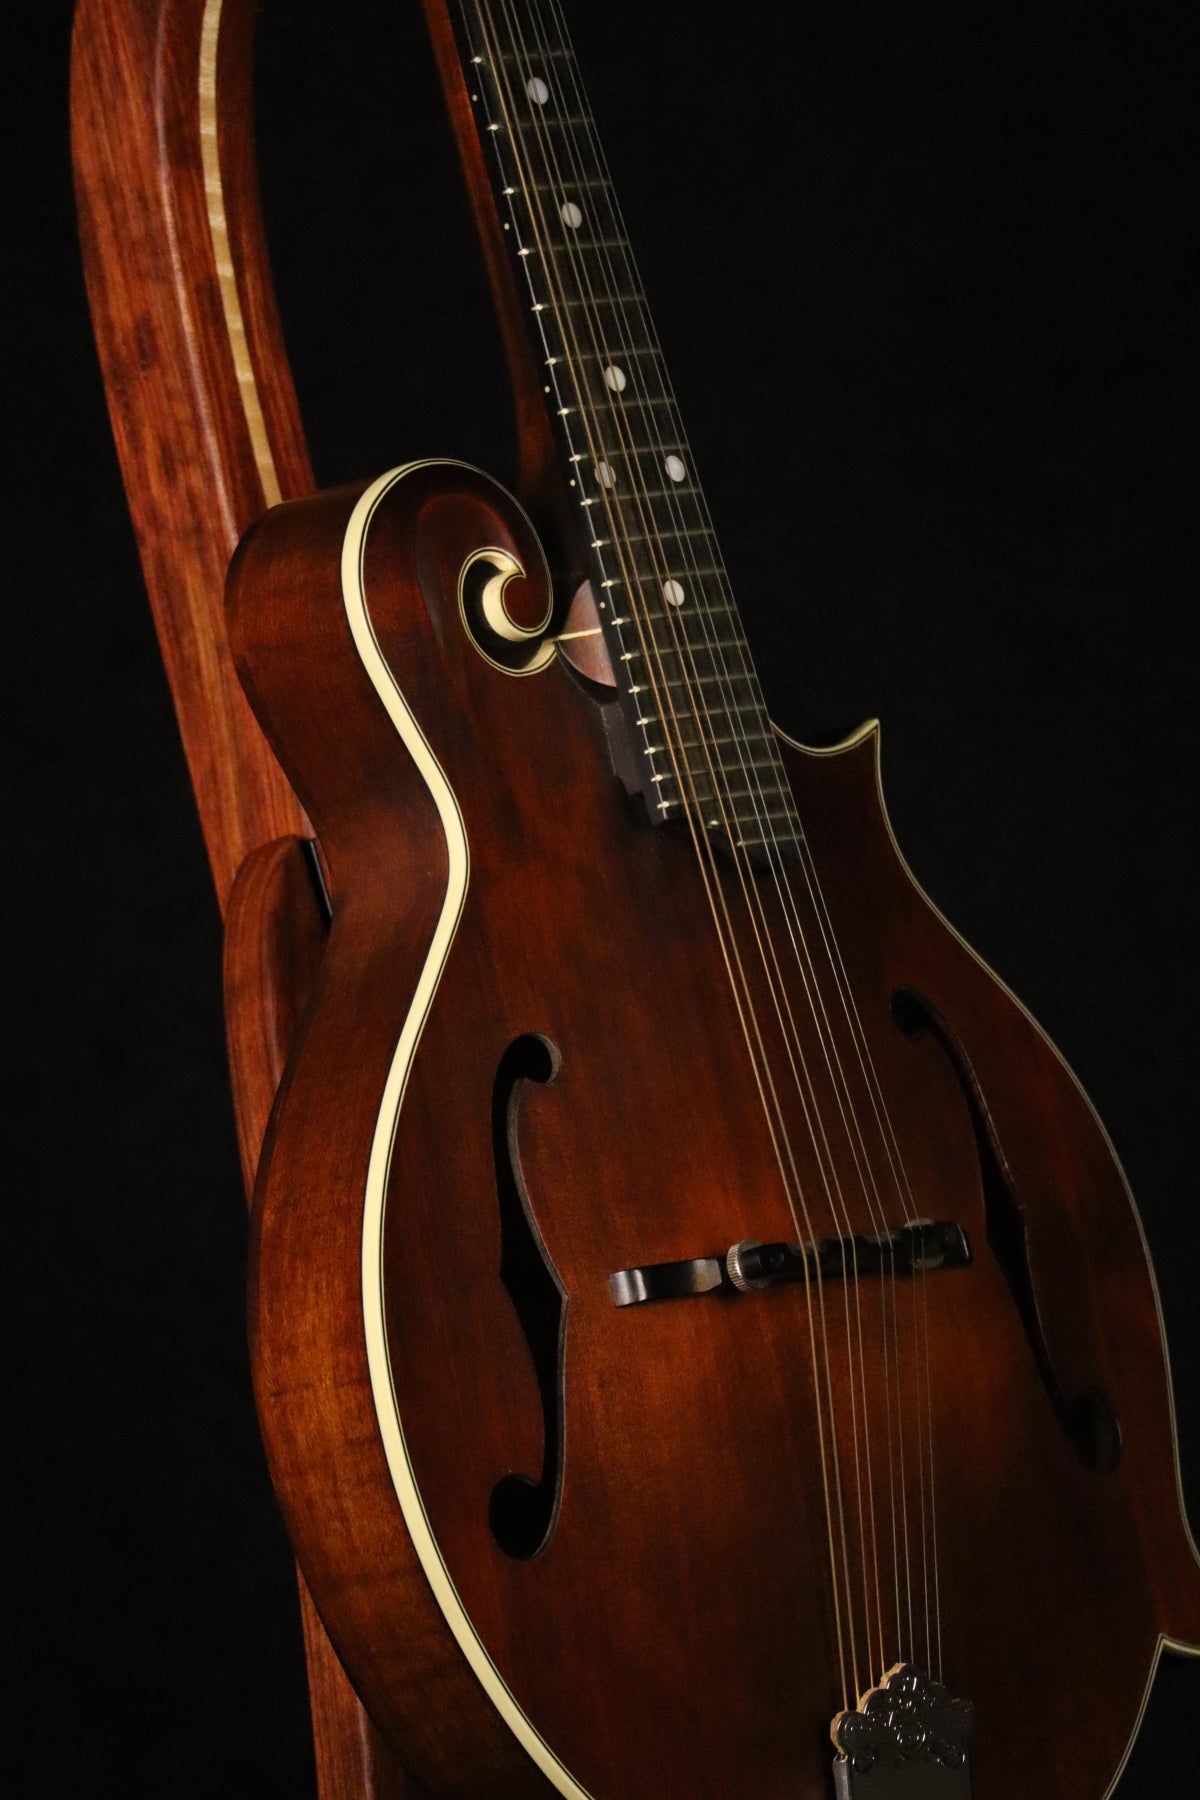 Folding bubinga rosewood and curly maple wood mandolin floor stand closeup front image with Eastman mandolin